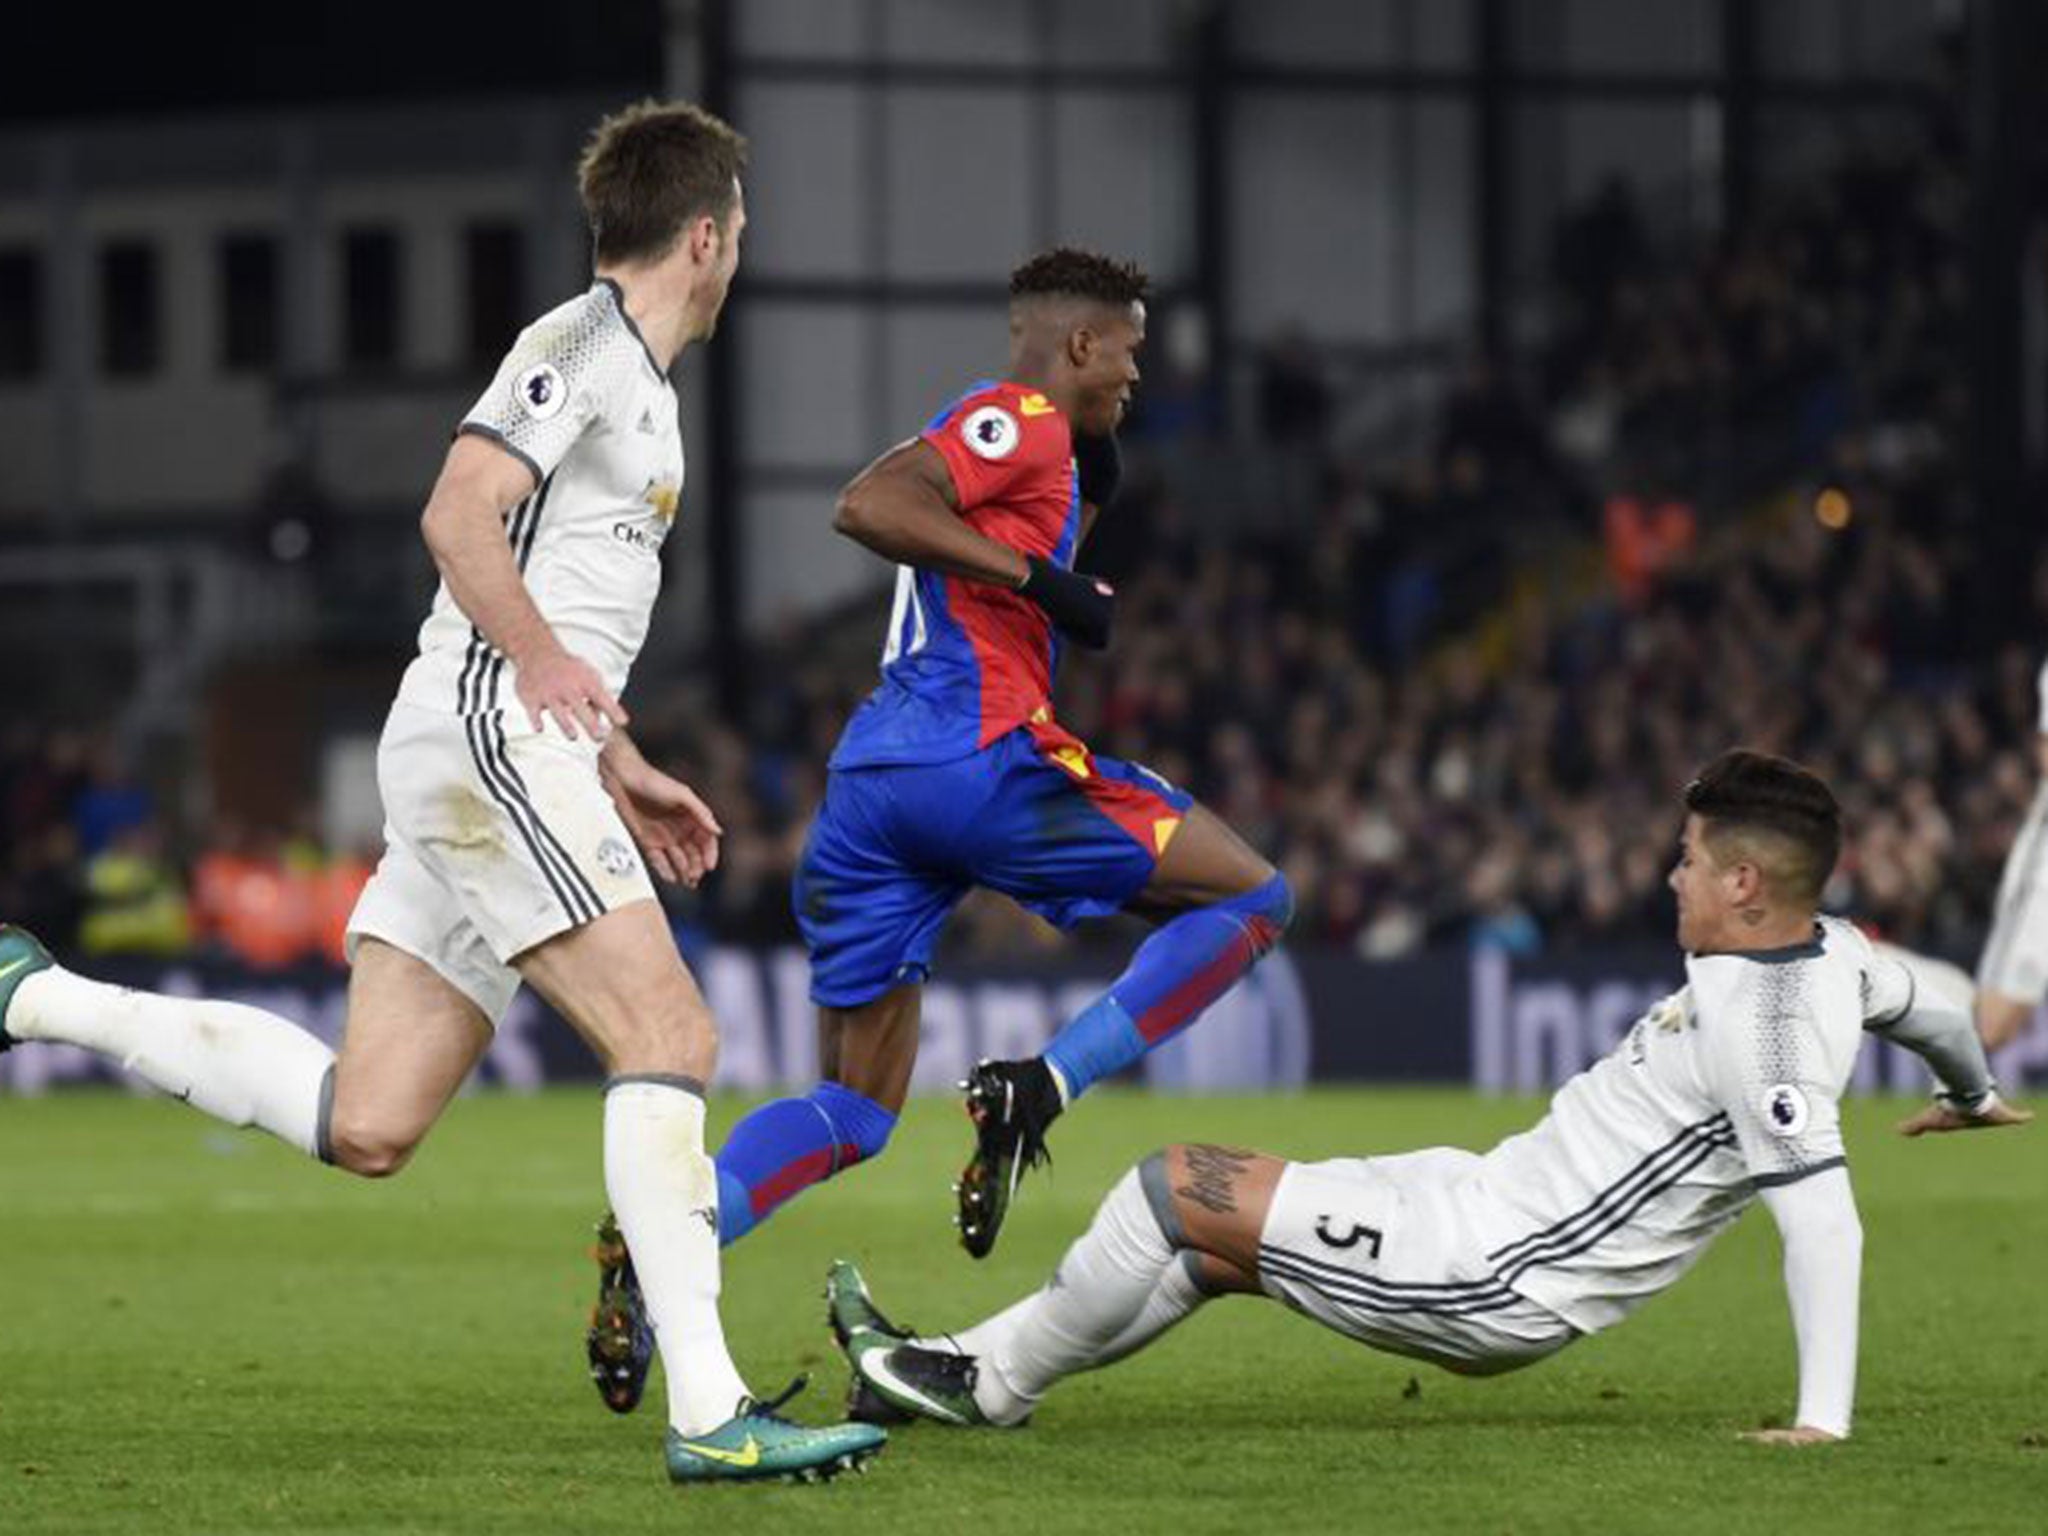 krig ydre Musling Manchester United news: Jose Mourinho defends 'clean player' Marcos Rojo  but Alan Pardew says tackle deserved red | The Independent | The Independent